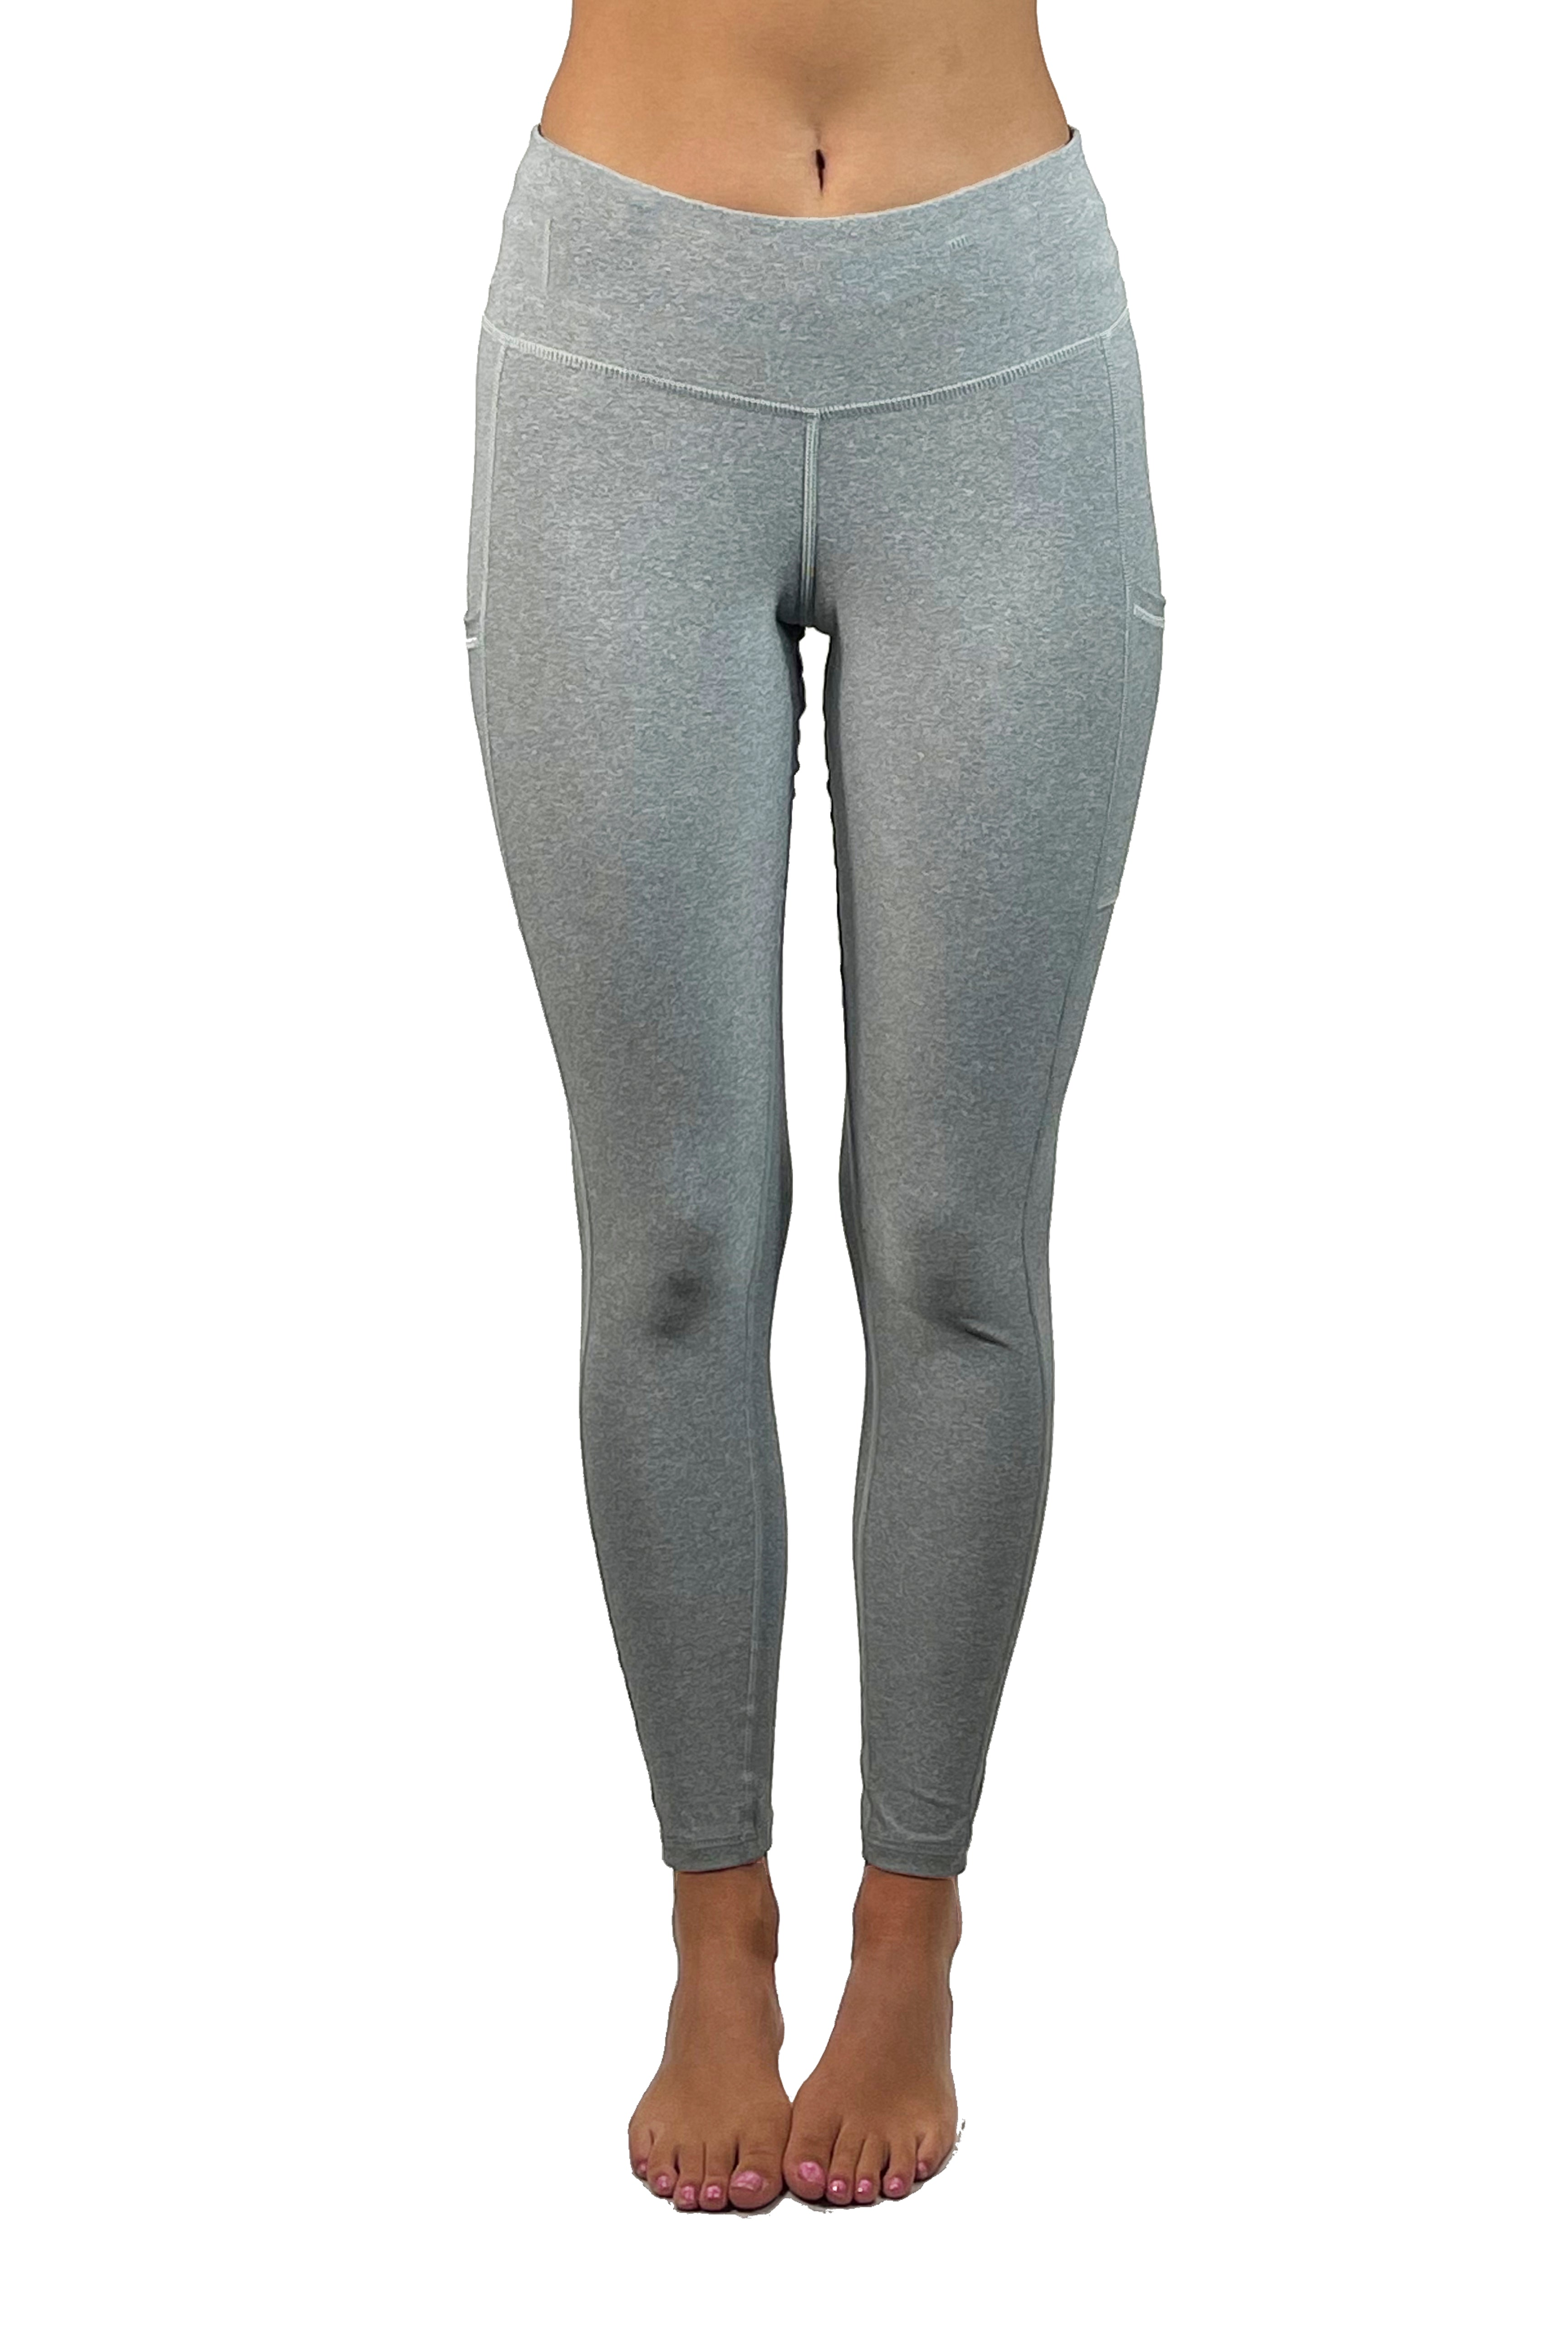 4201 - The "Victory" Cell Phone Pocket Legging/Heather Grey- FINAL SALE